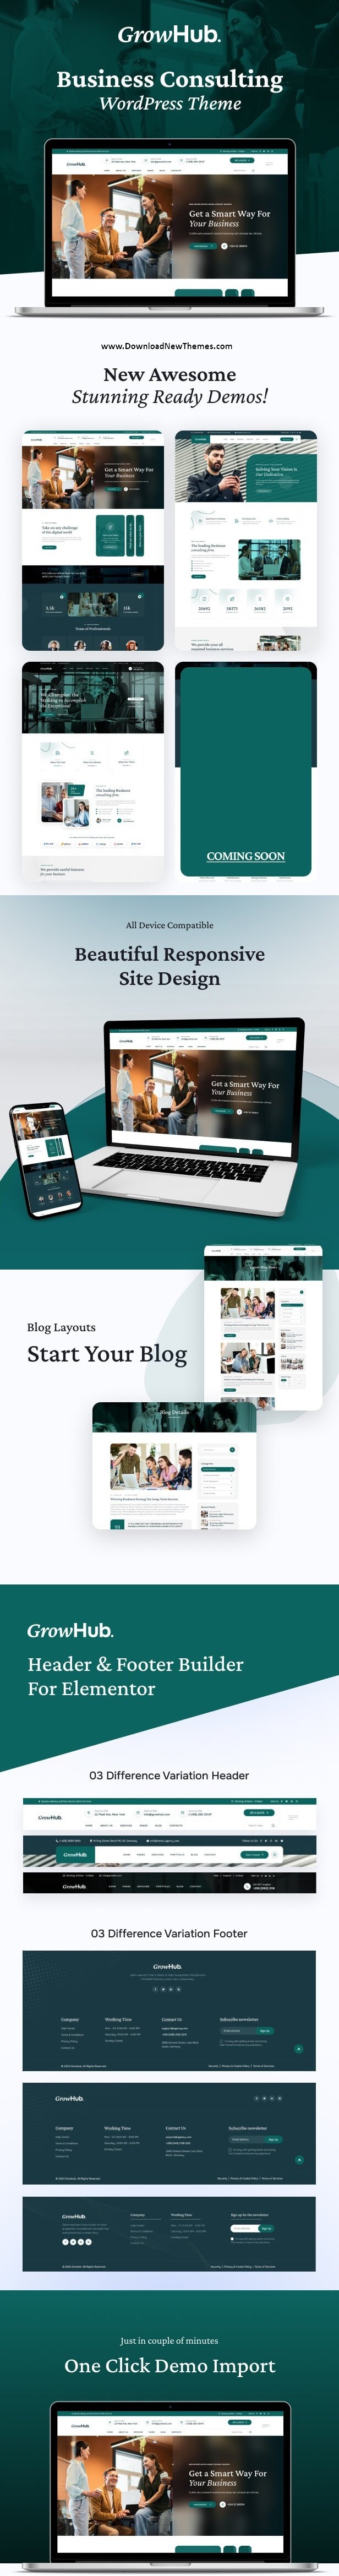 GrowHub - Business Consulting WordPress Theme Review